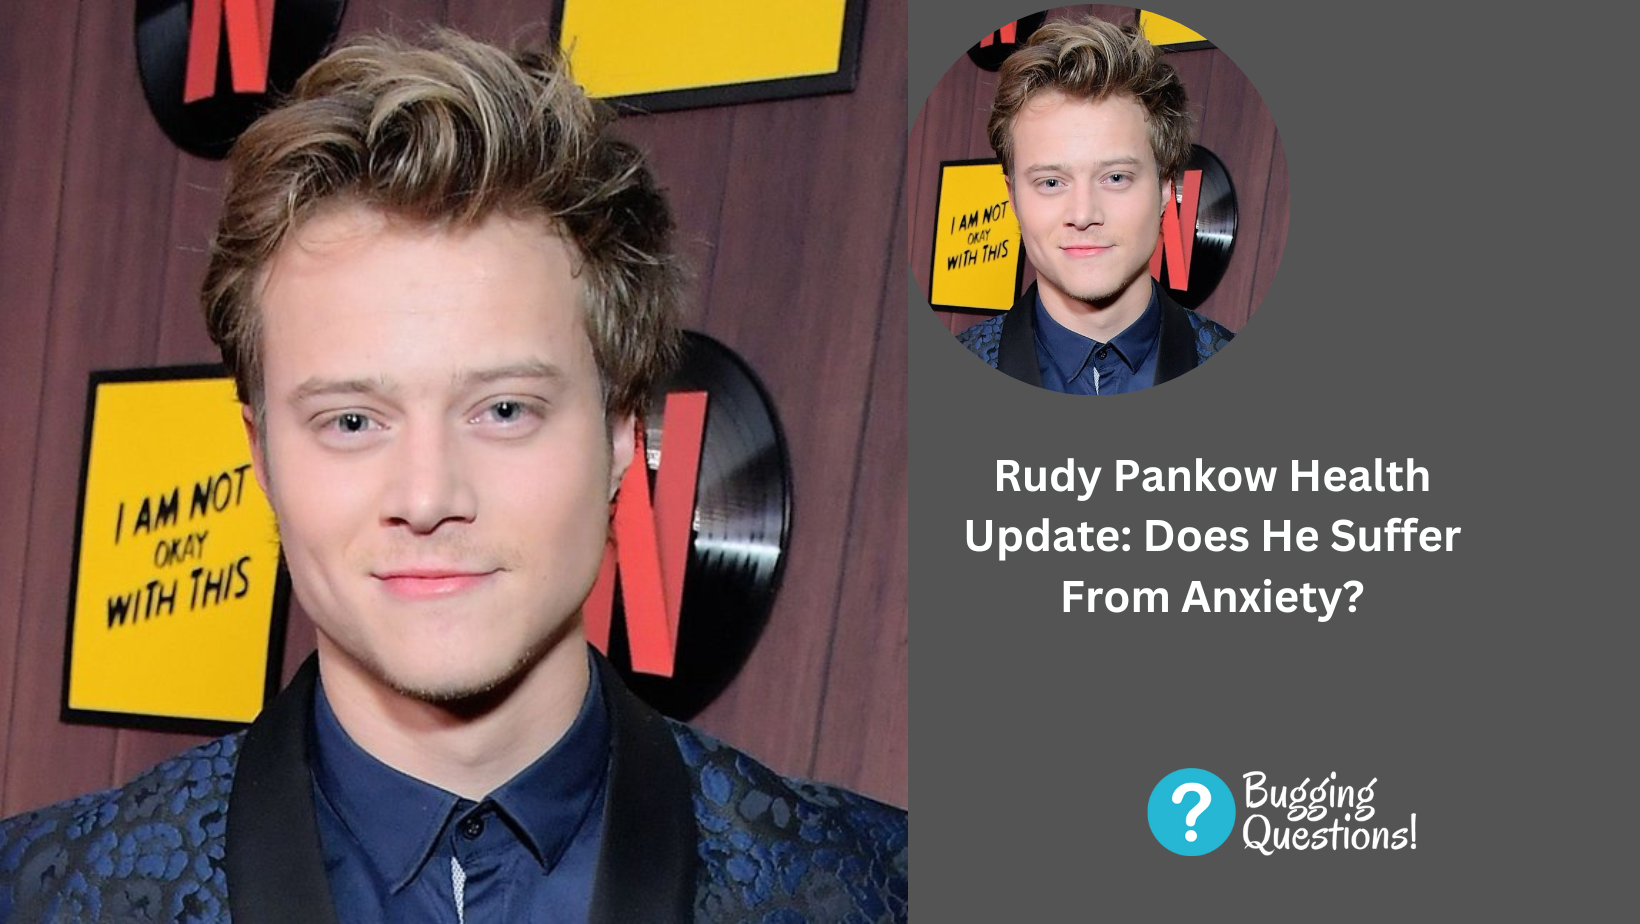 Rudy Pankow Health Update: Does He Suffer From Anxiety?